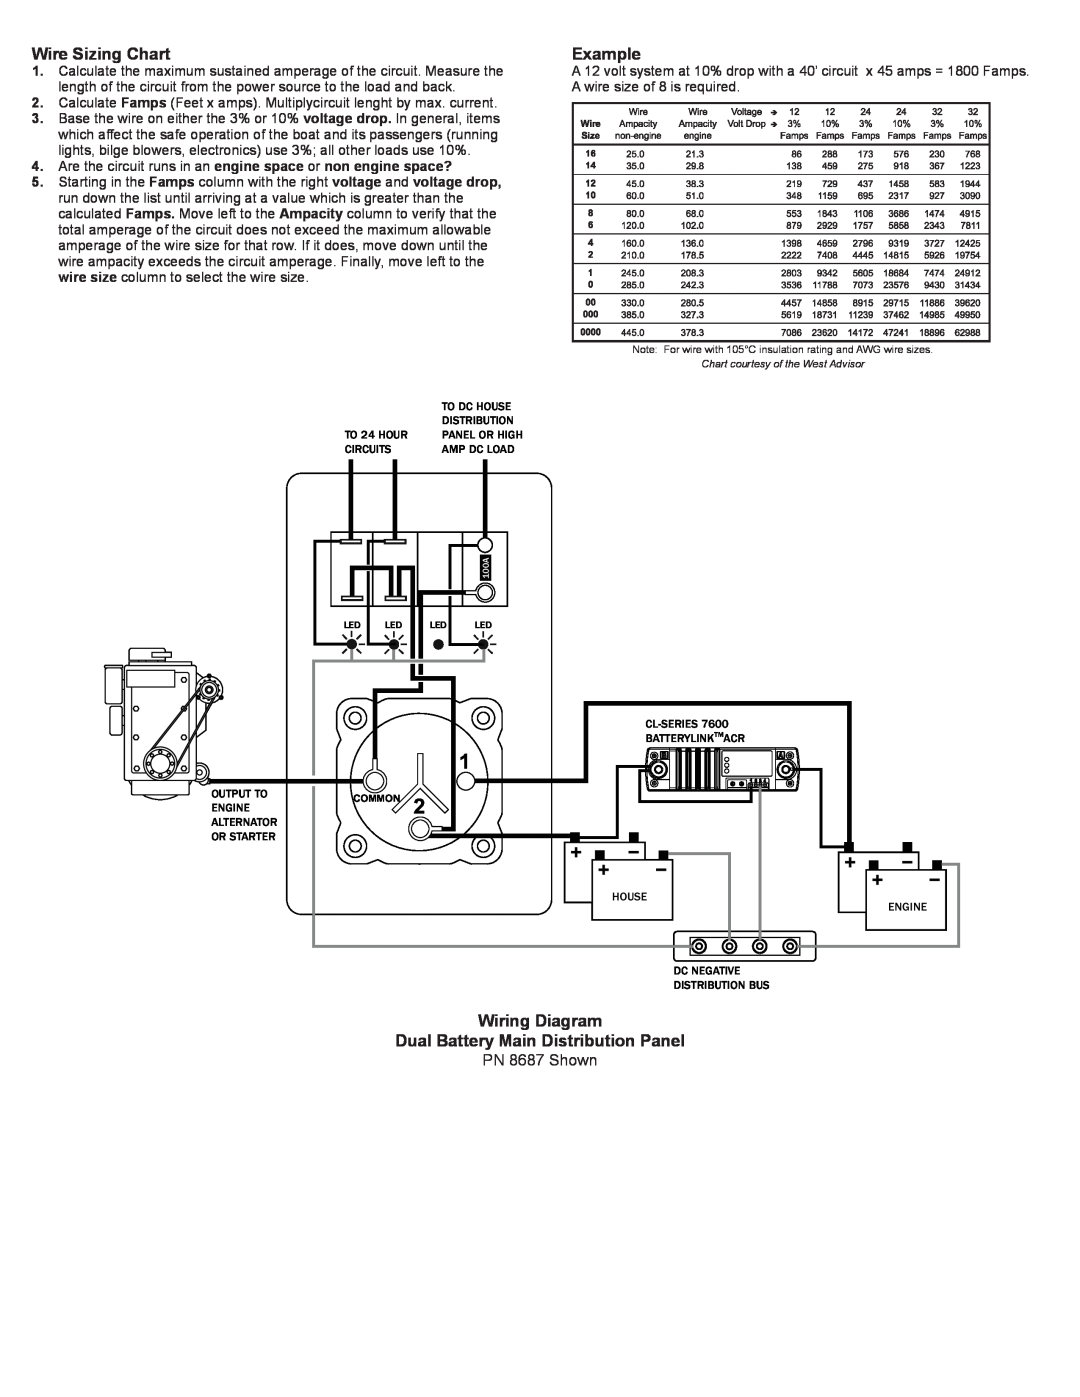 Blue Sea Systems 8691 Wire Sizing Chart, Example, Wiring Diagram Dual Battery Main Distribution Panel, PN 8687 Shown 